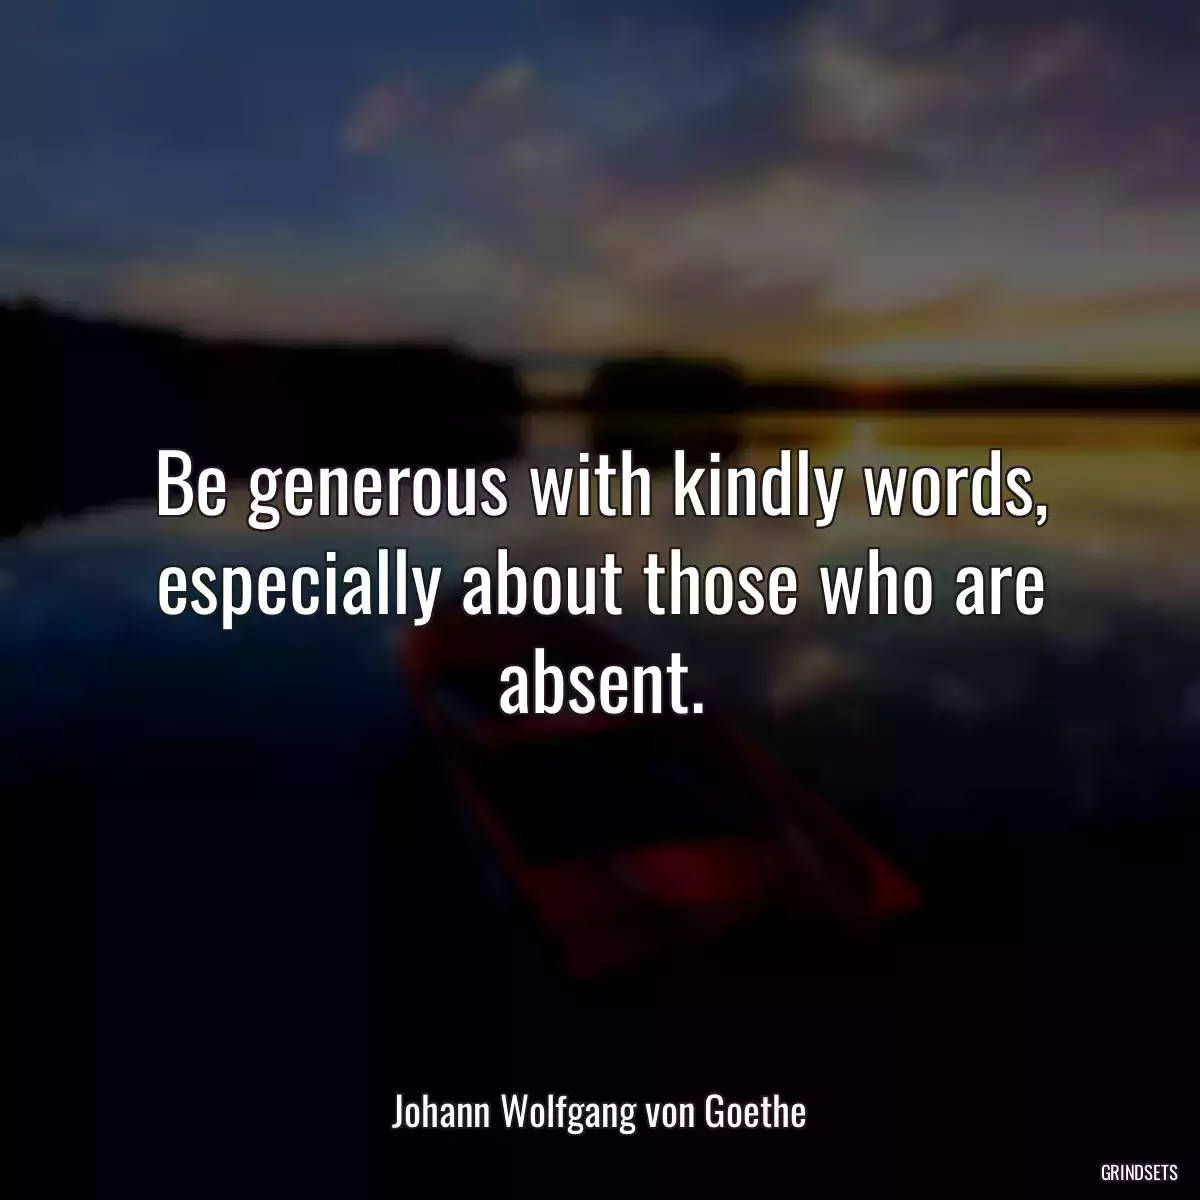 Be generous with kindly words, especially about those who are absent.